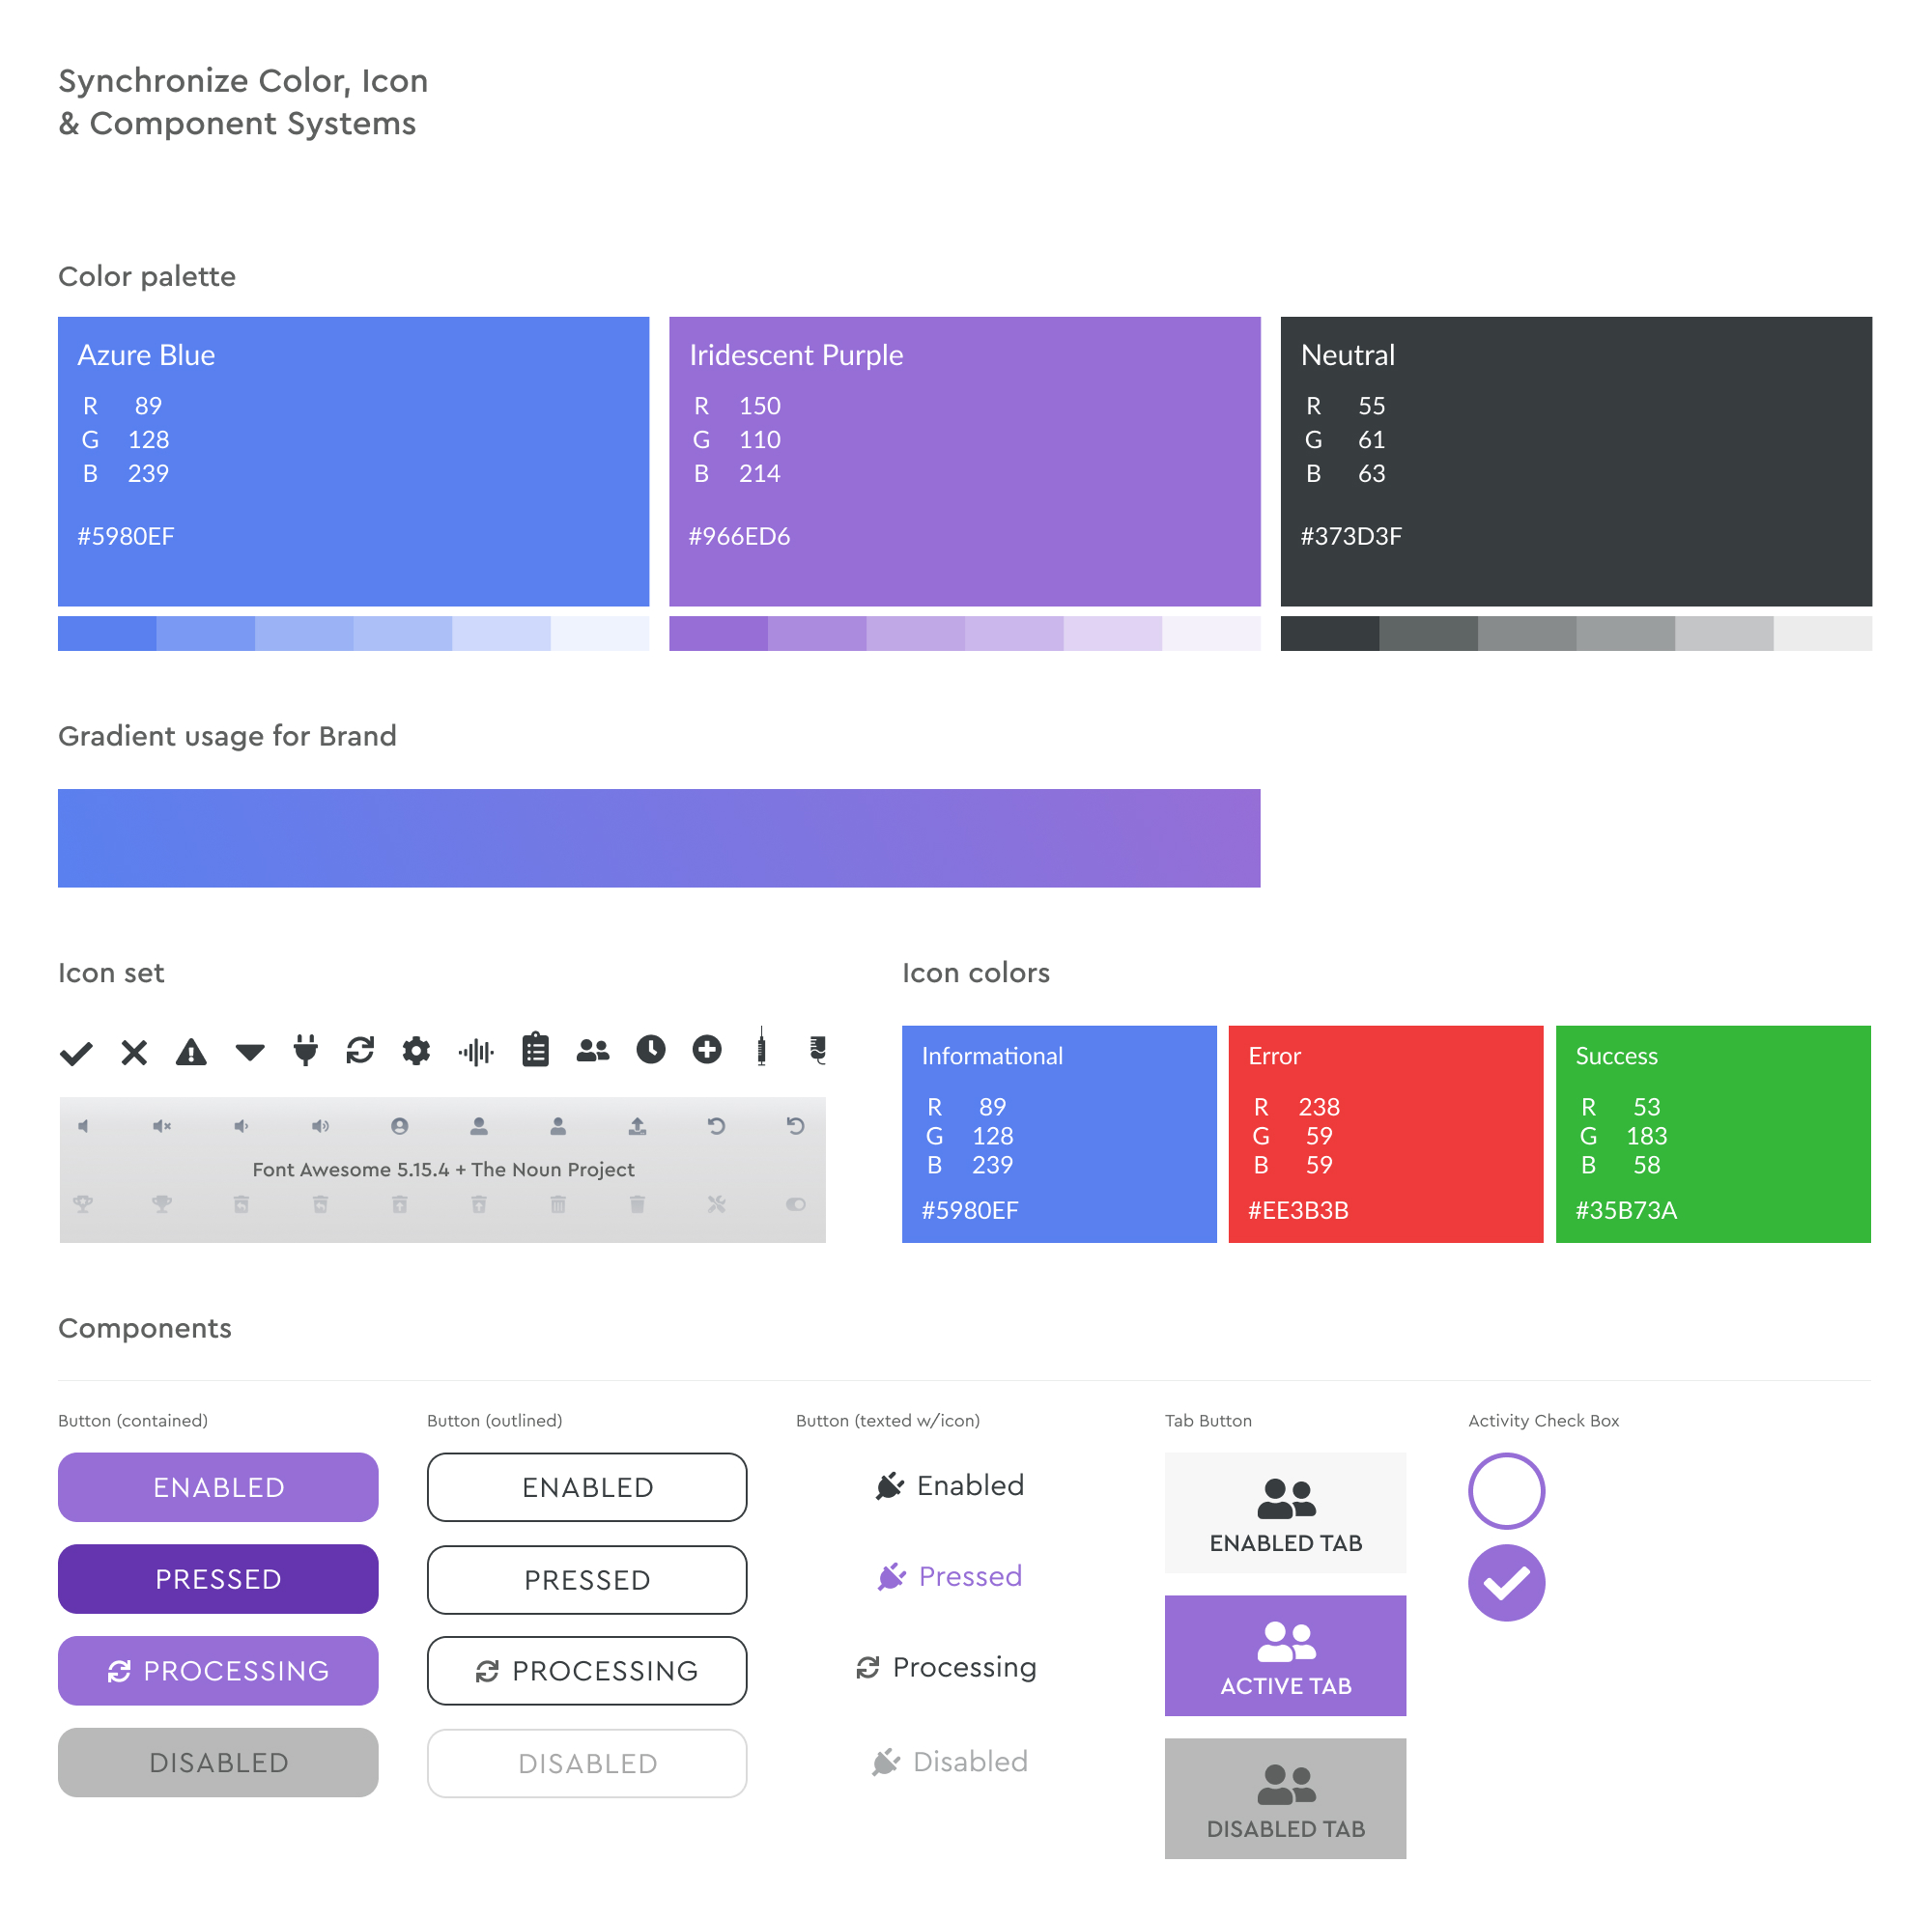 Project image for Synchronize, Color, Icon and Component Systems.